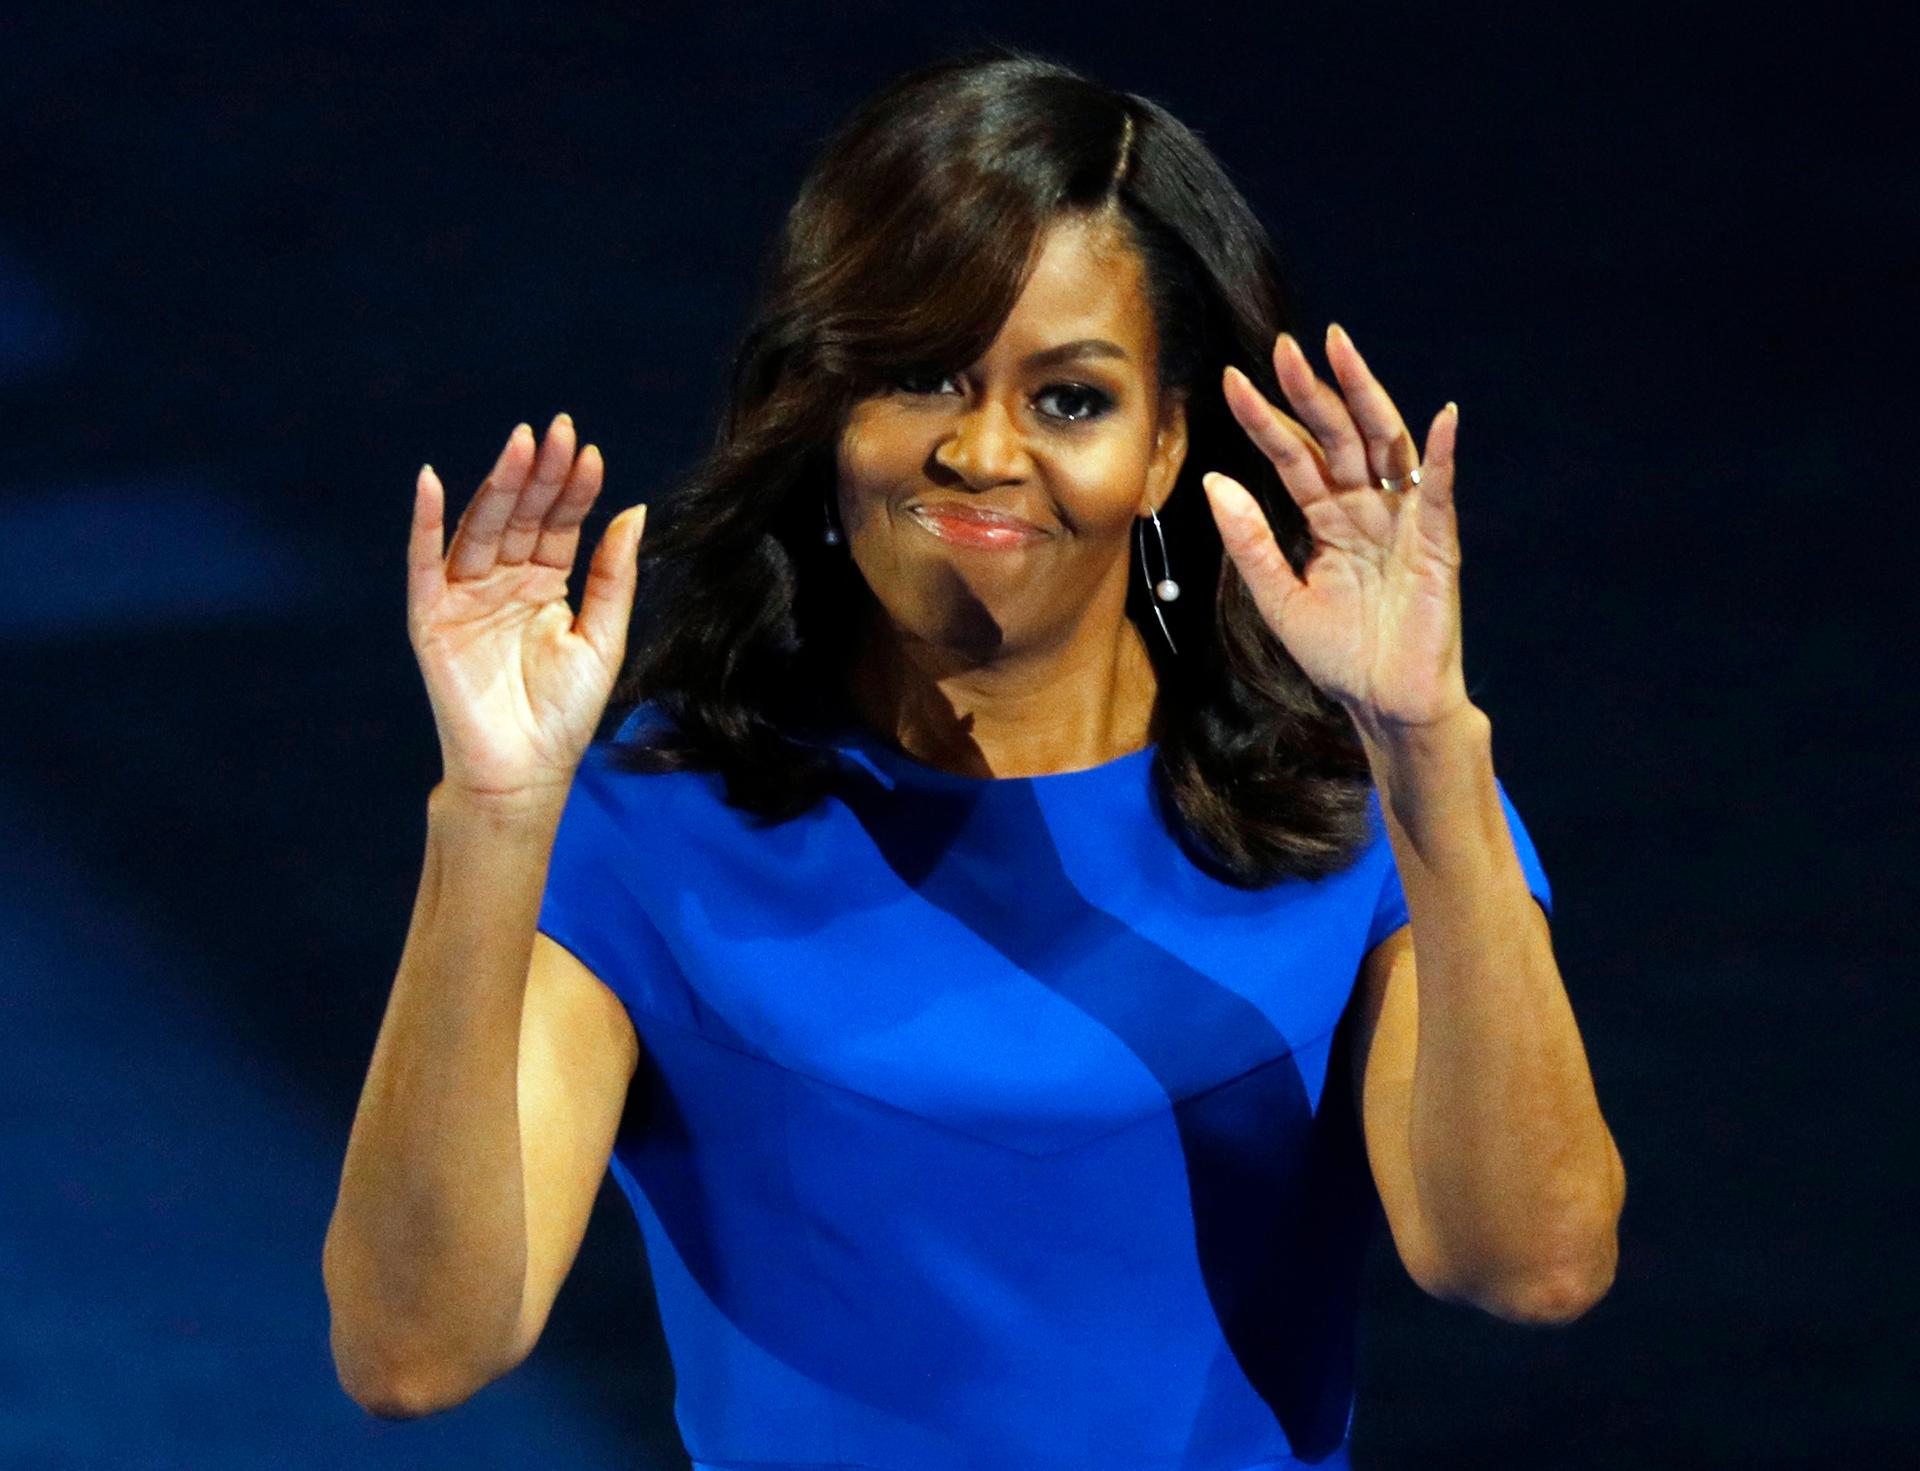 U.S. First lady Michelle Obama addresses the Democratic National Convention in Philadelphia, Pennsylvania.